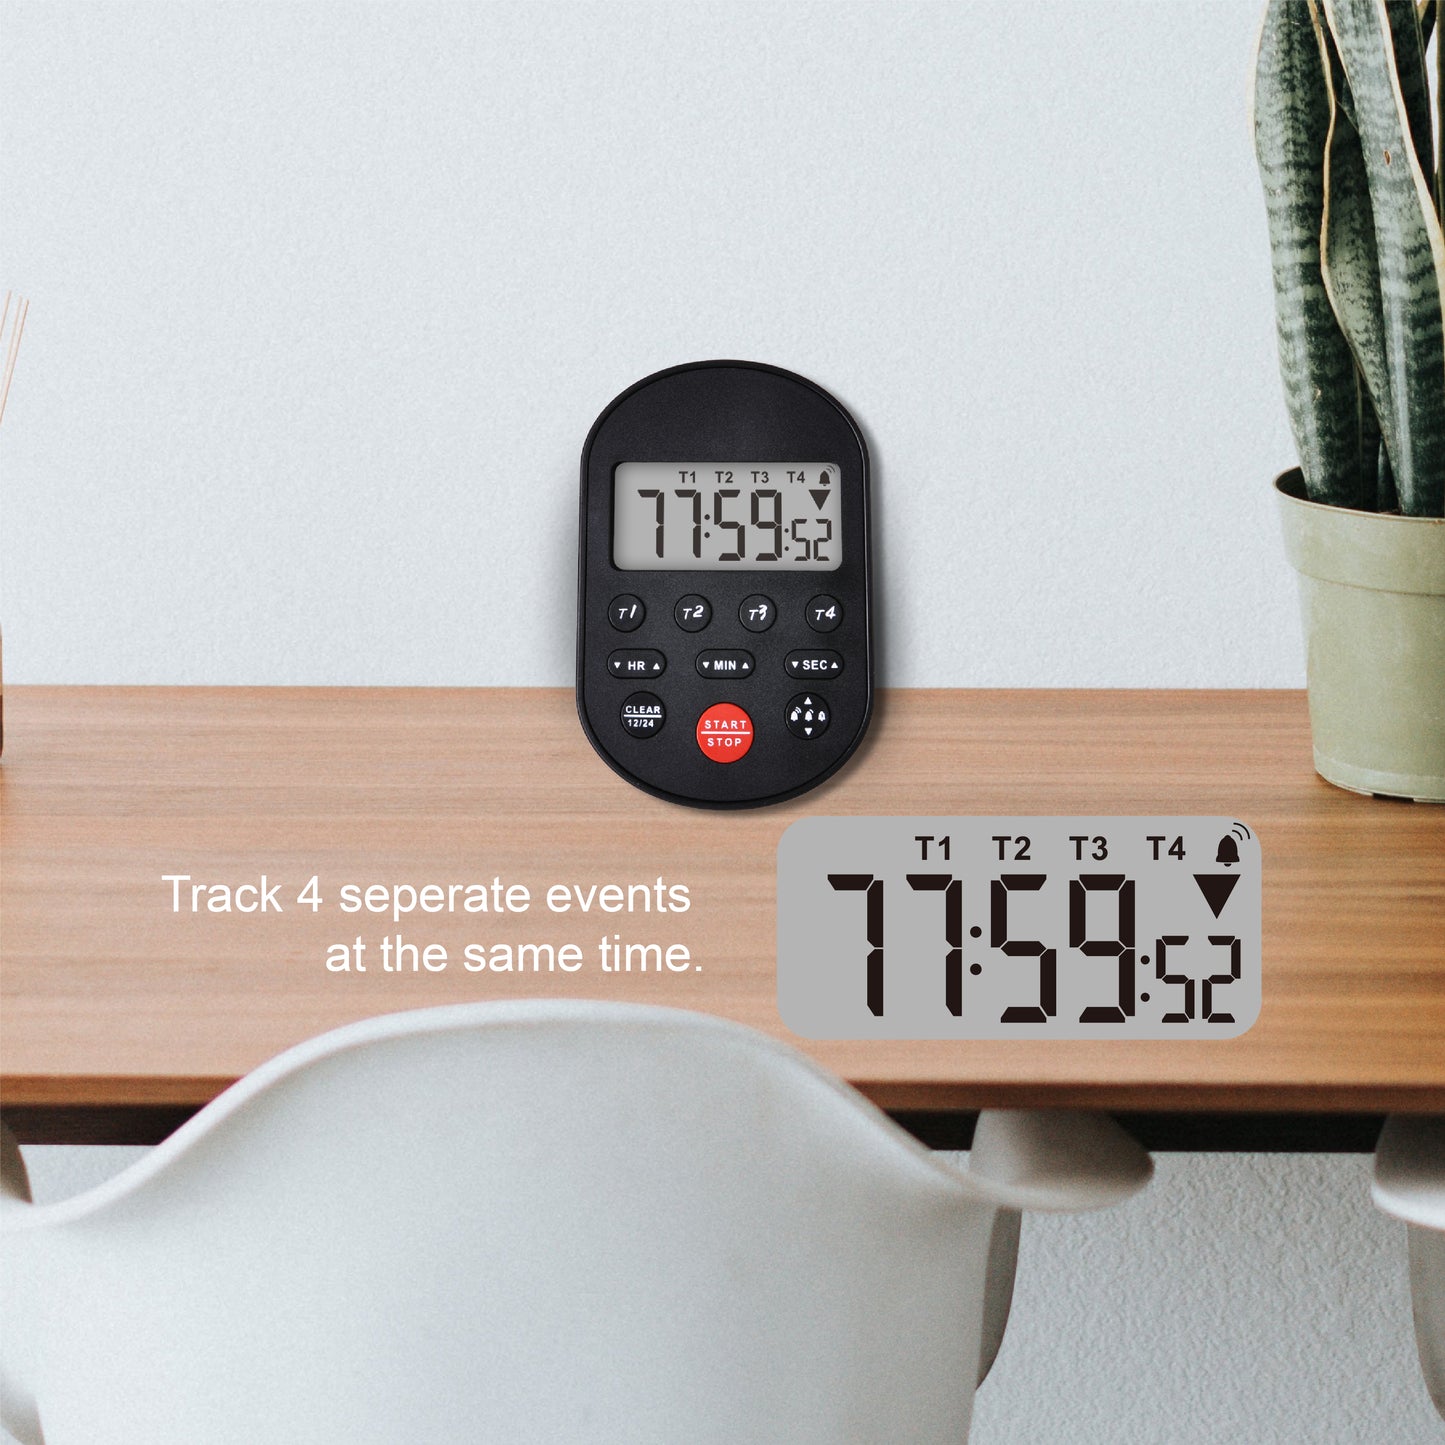 Runleader Digital Table-Top Timer Kitchen Timer 4 Groups of Count up Count Down Timers with Large LCD Display Big Digits Loud Alarm for Office Cooking